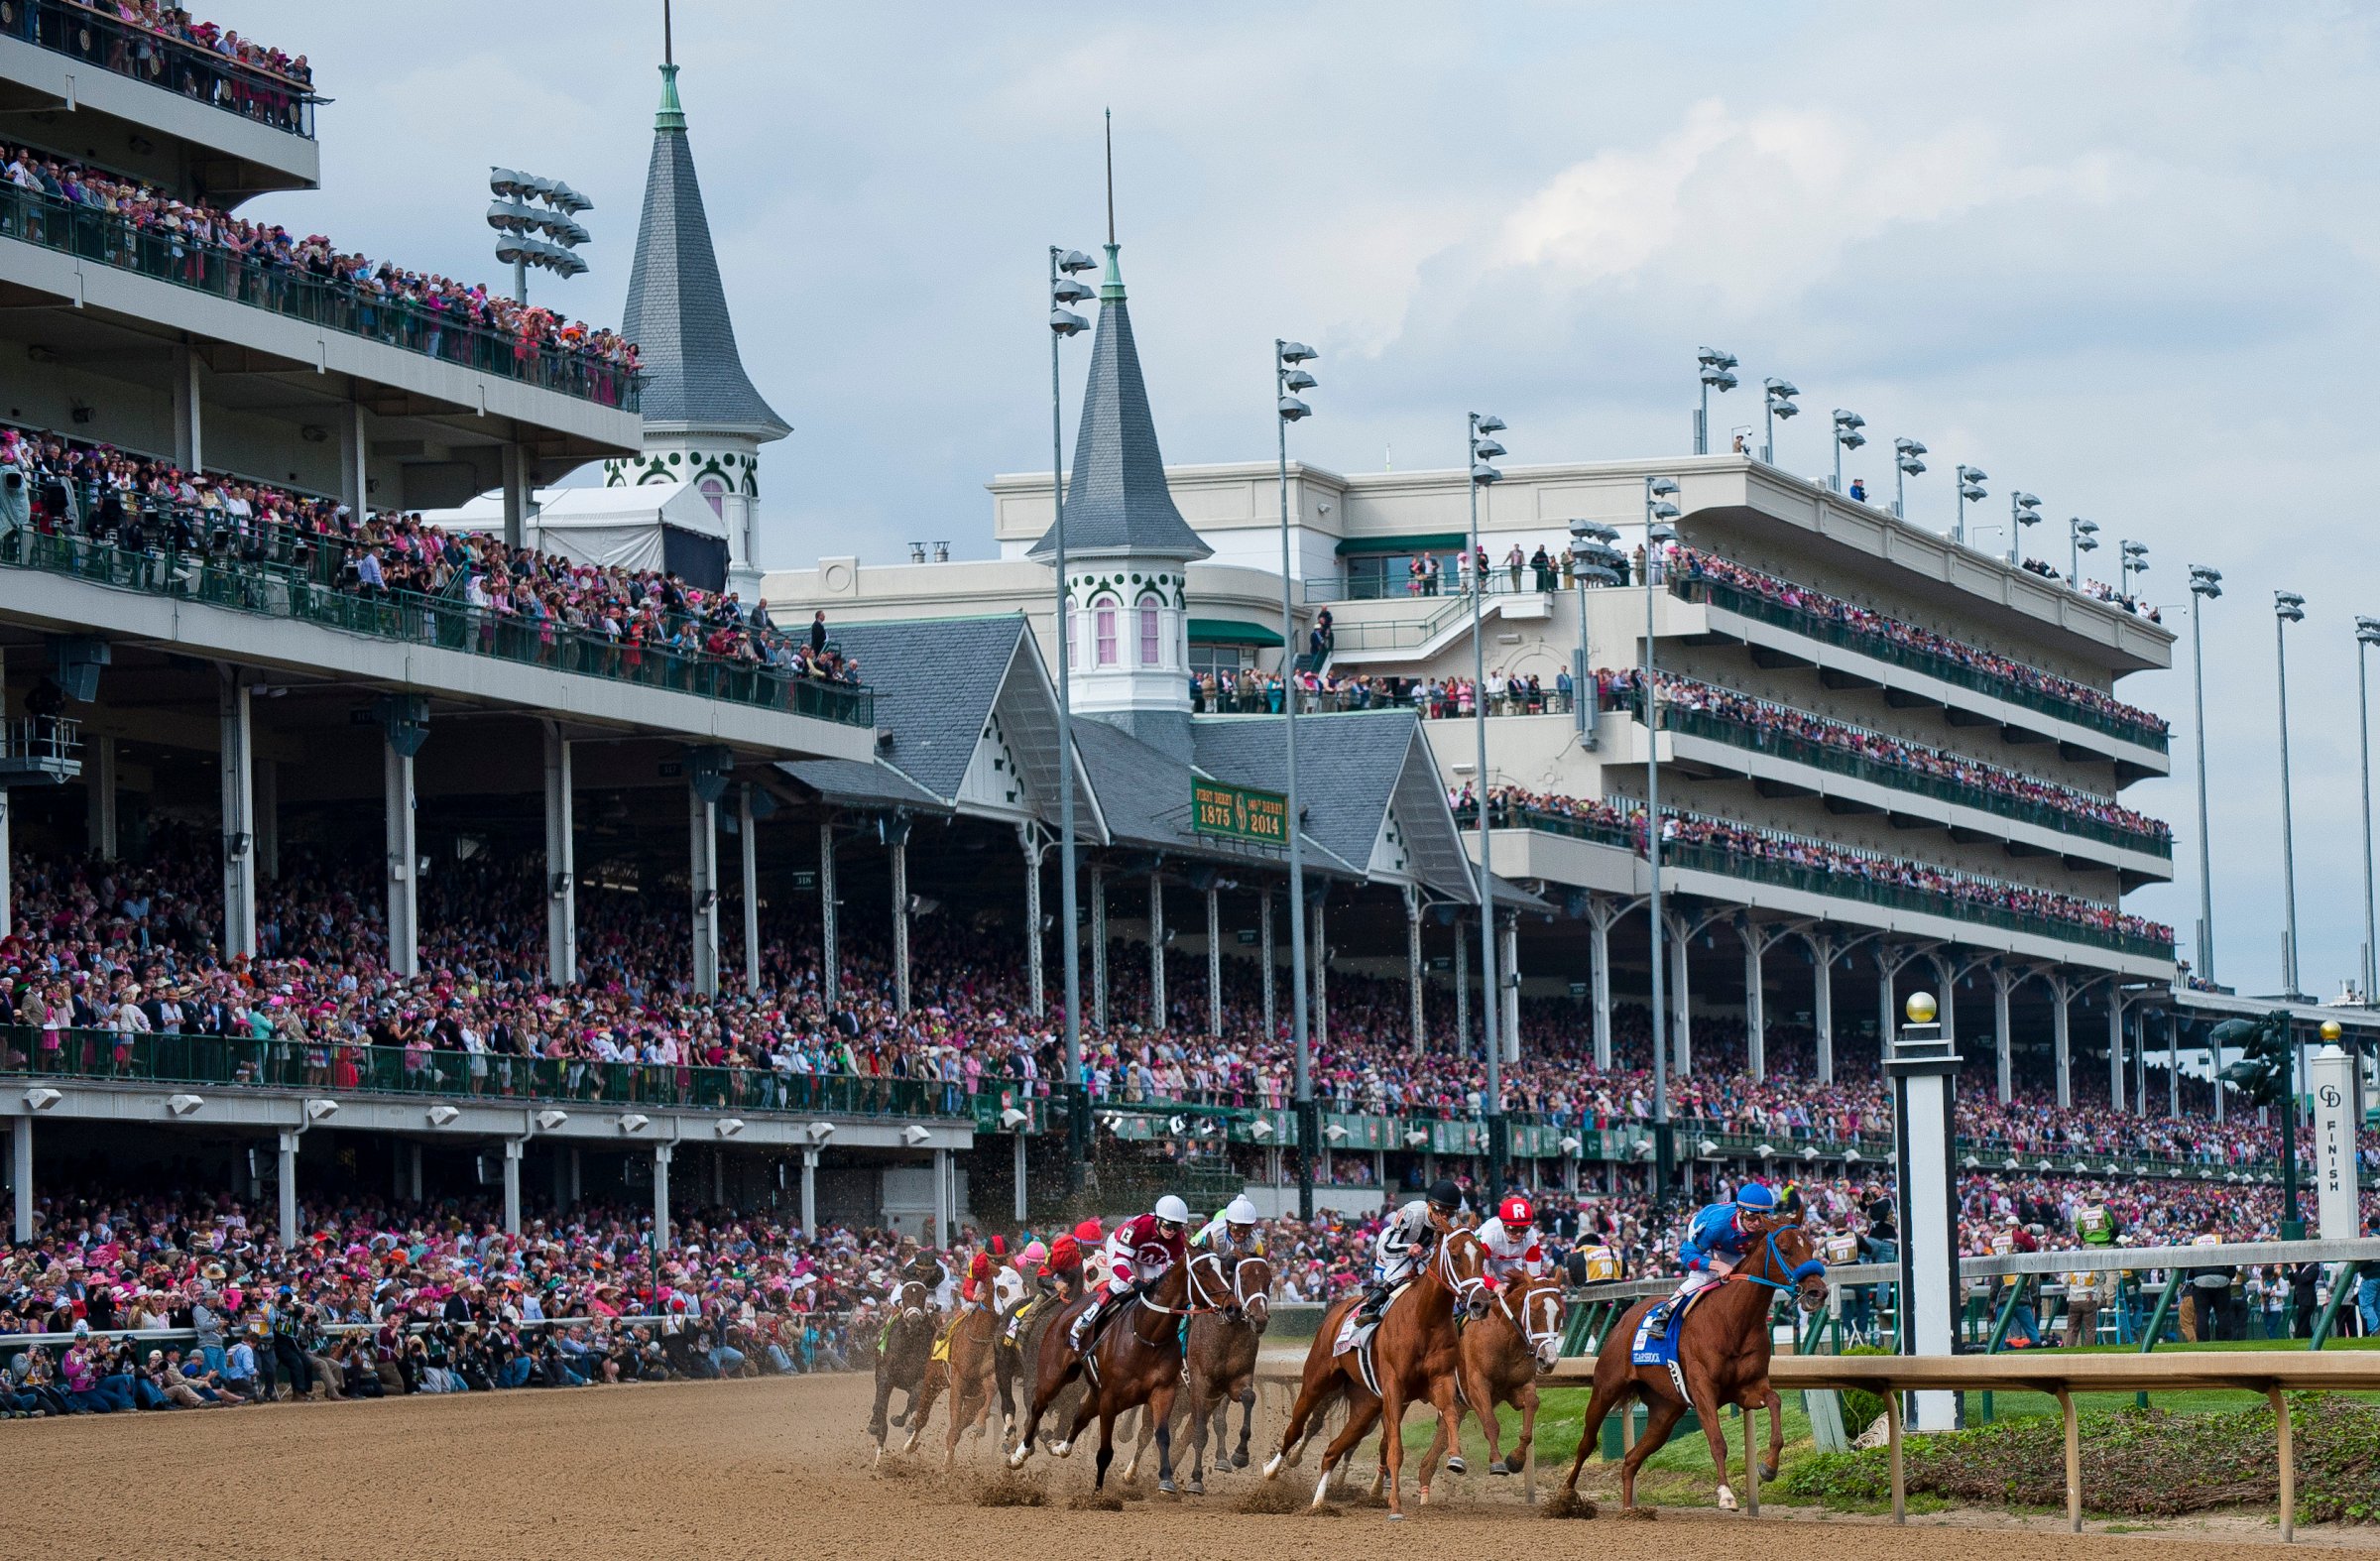 Kentucky Oaks Day at Churchill Downs in Louisville, Ky. on May 2, 2014.